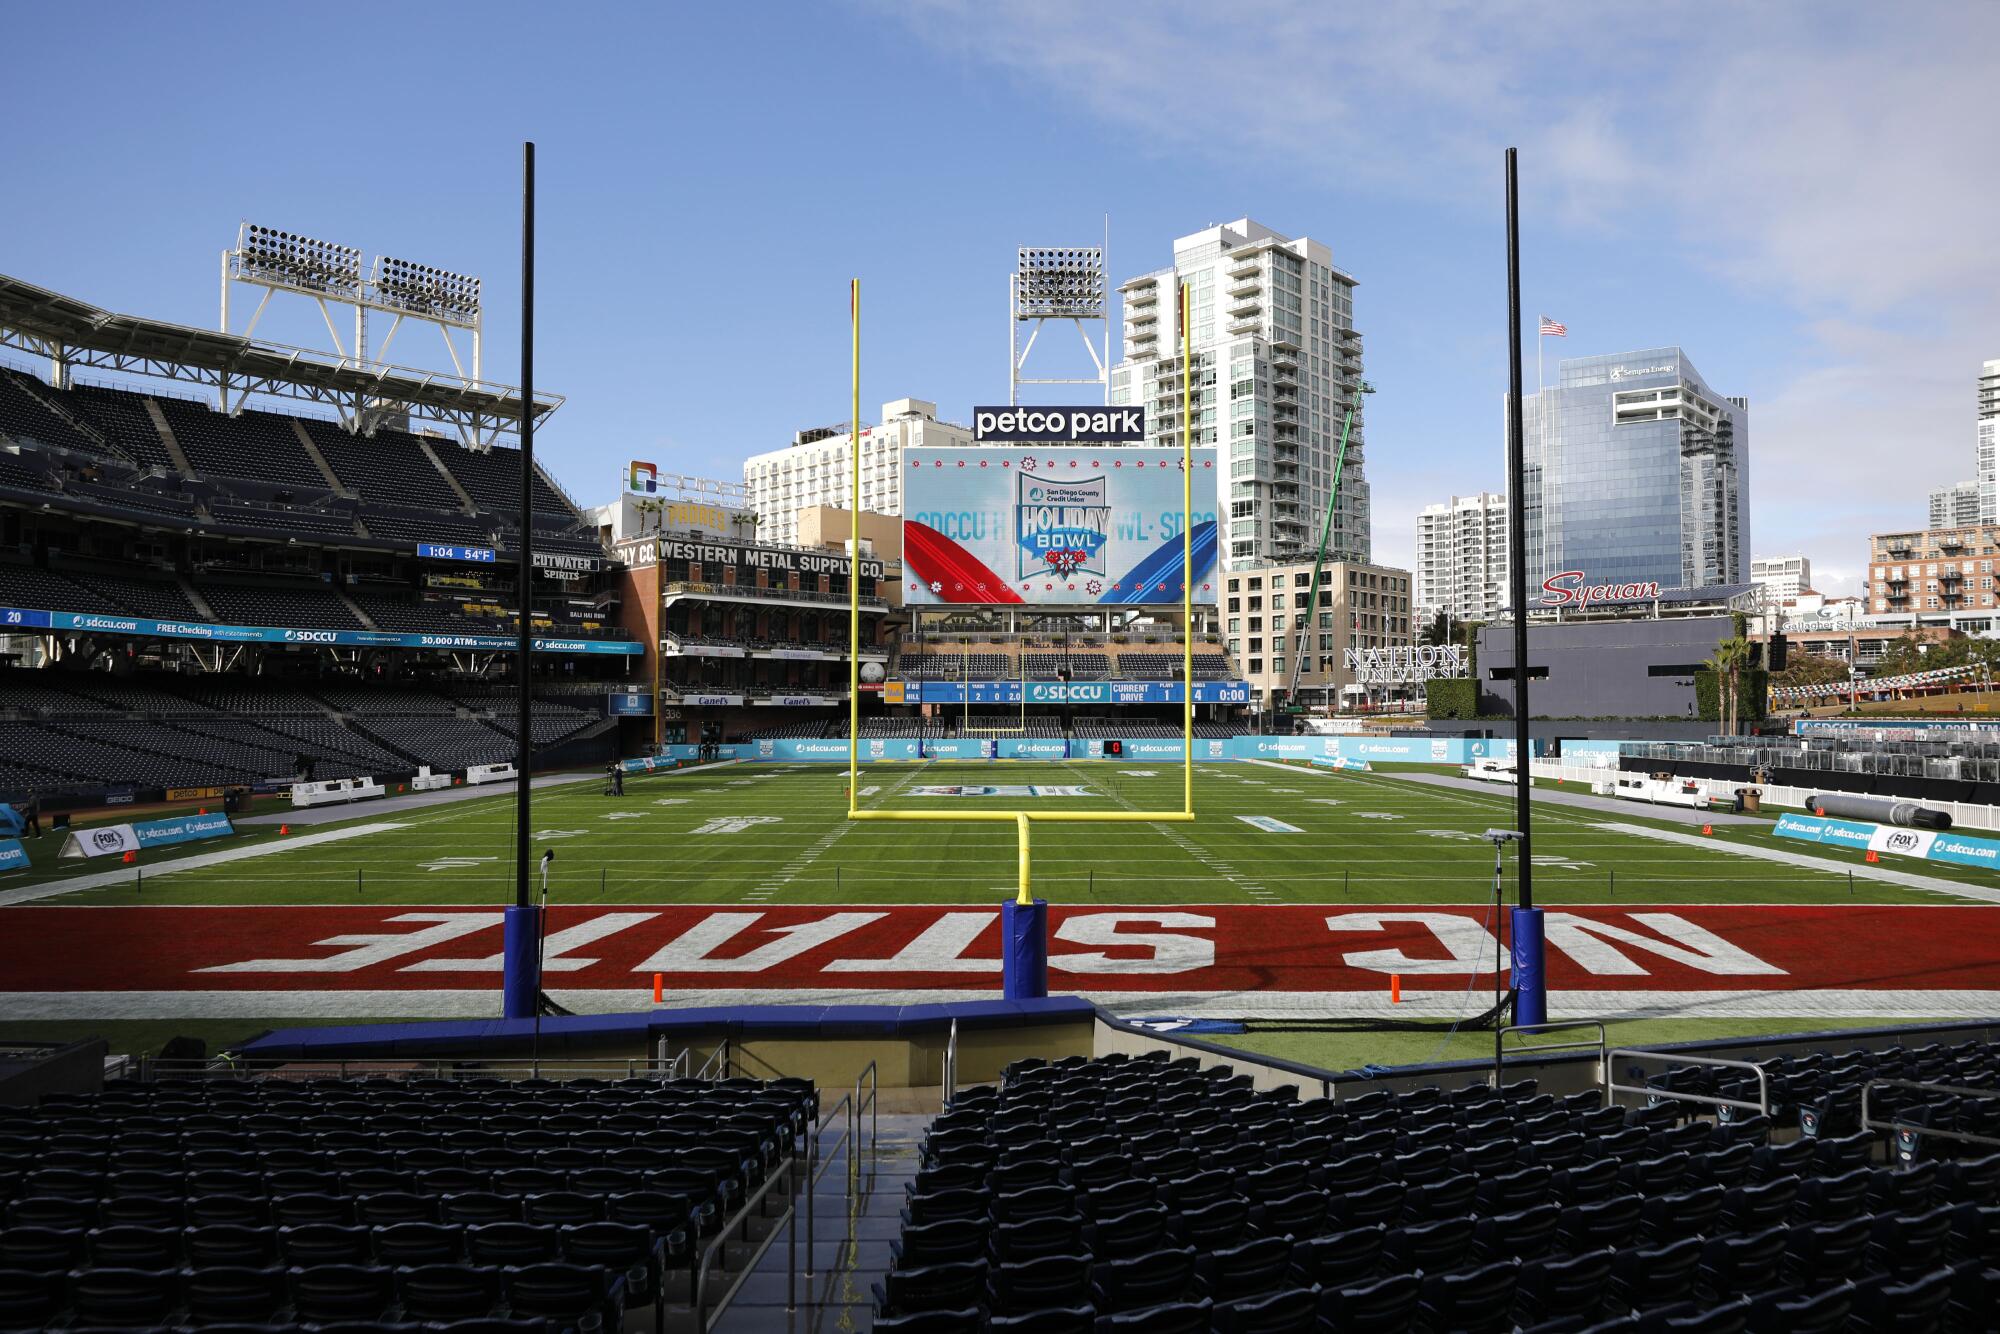 Petco Park was converted to fit a football field for the Holiday Bowl.